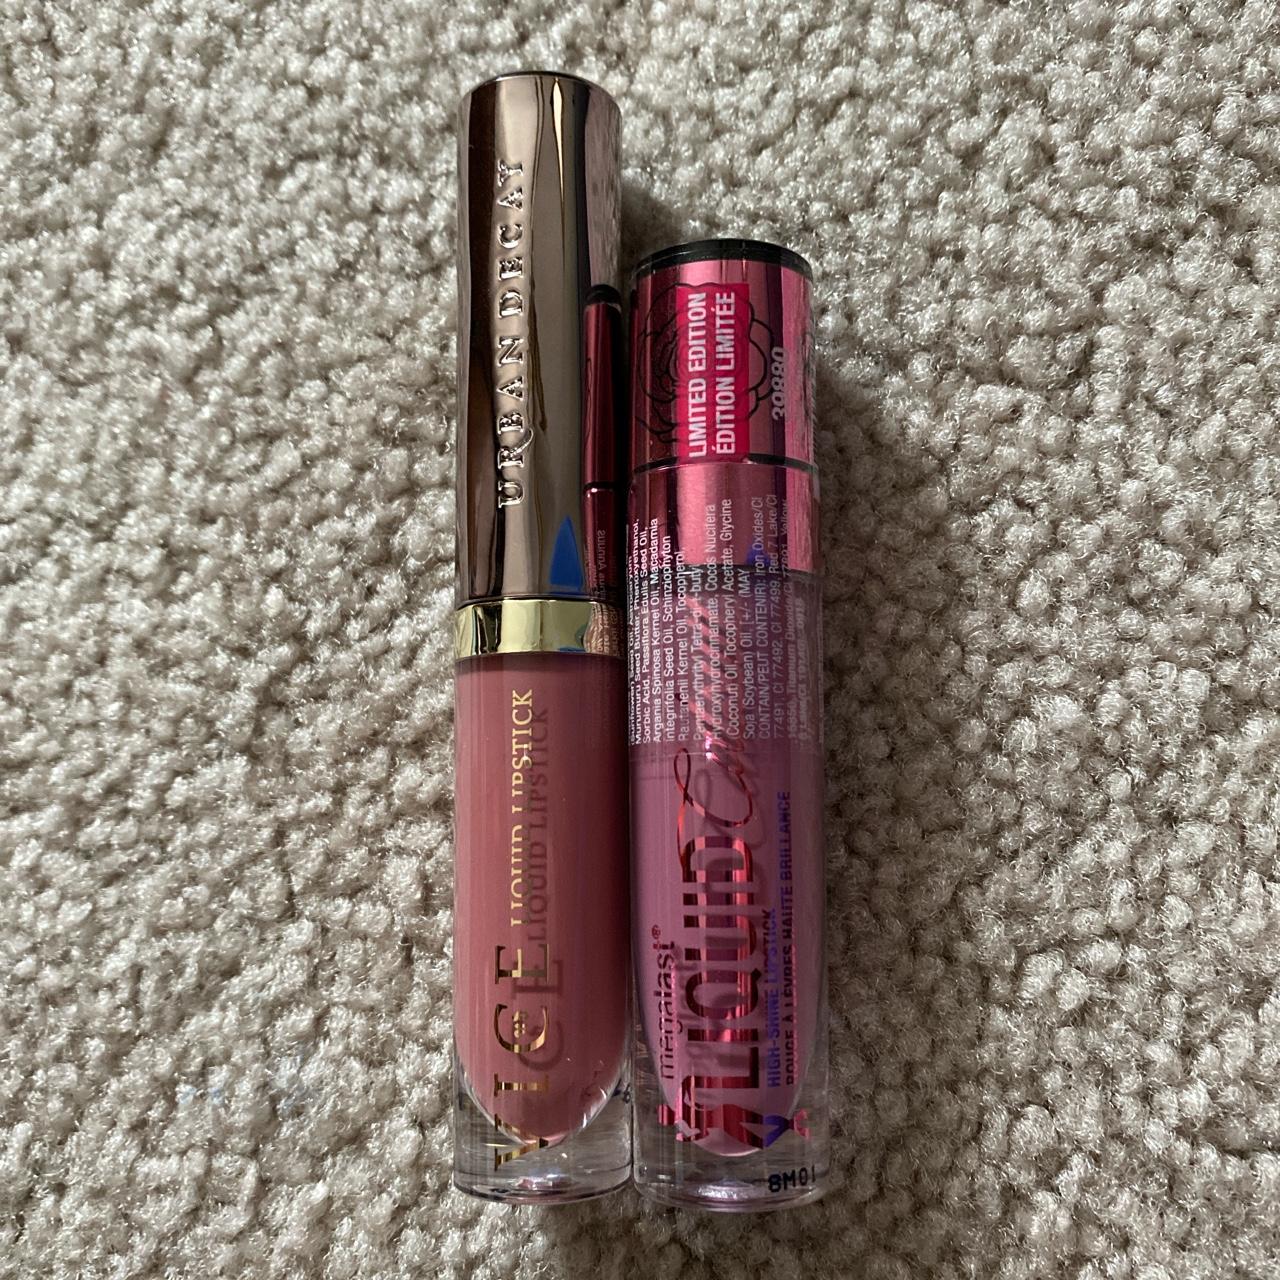 Product Image 2 - lip color duo
BRAND NEW NEVER